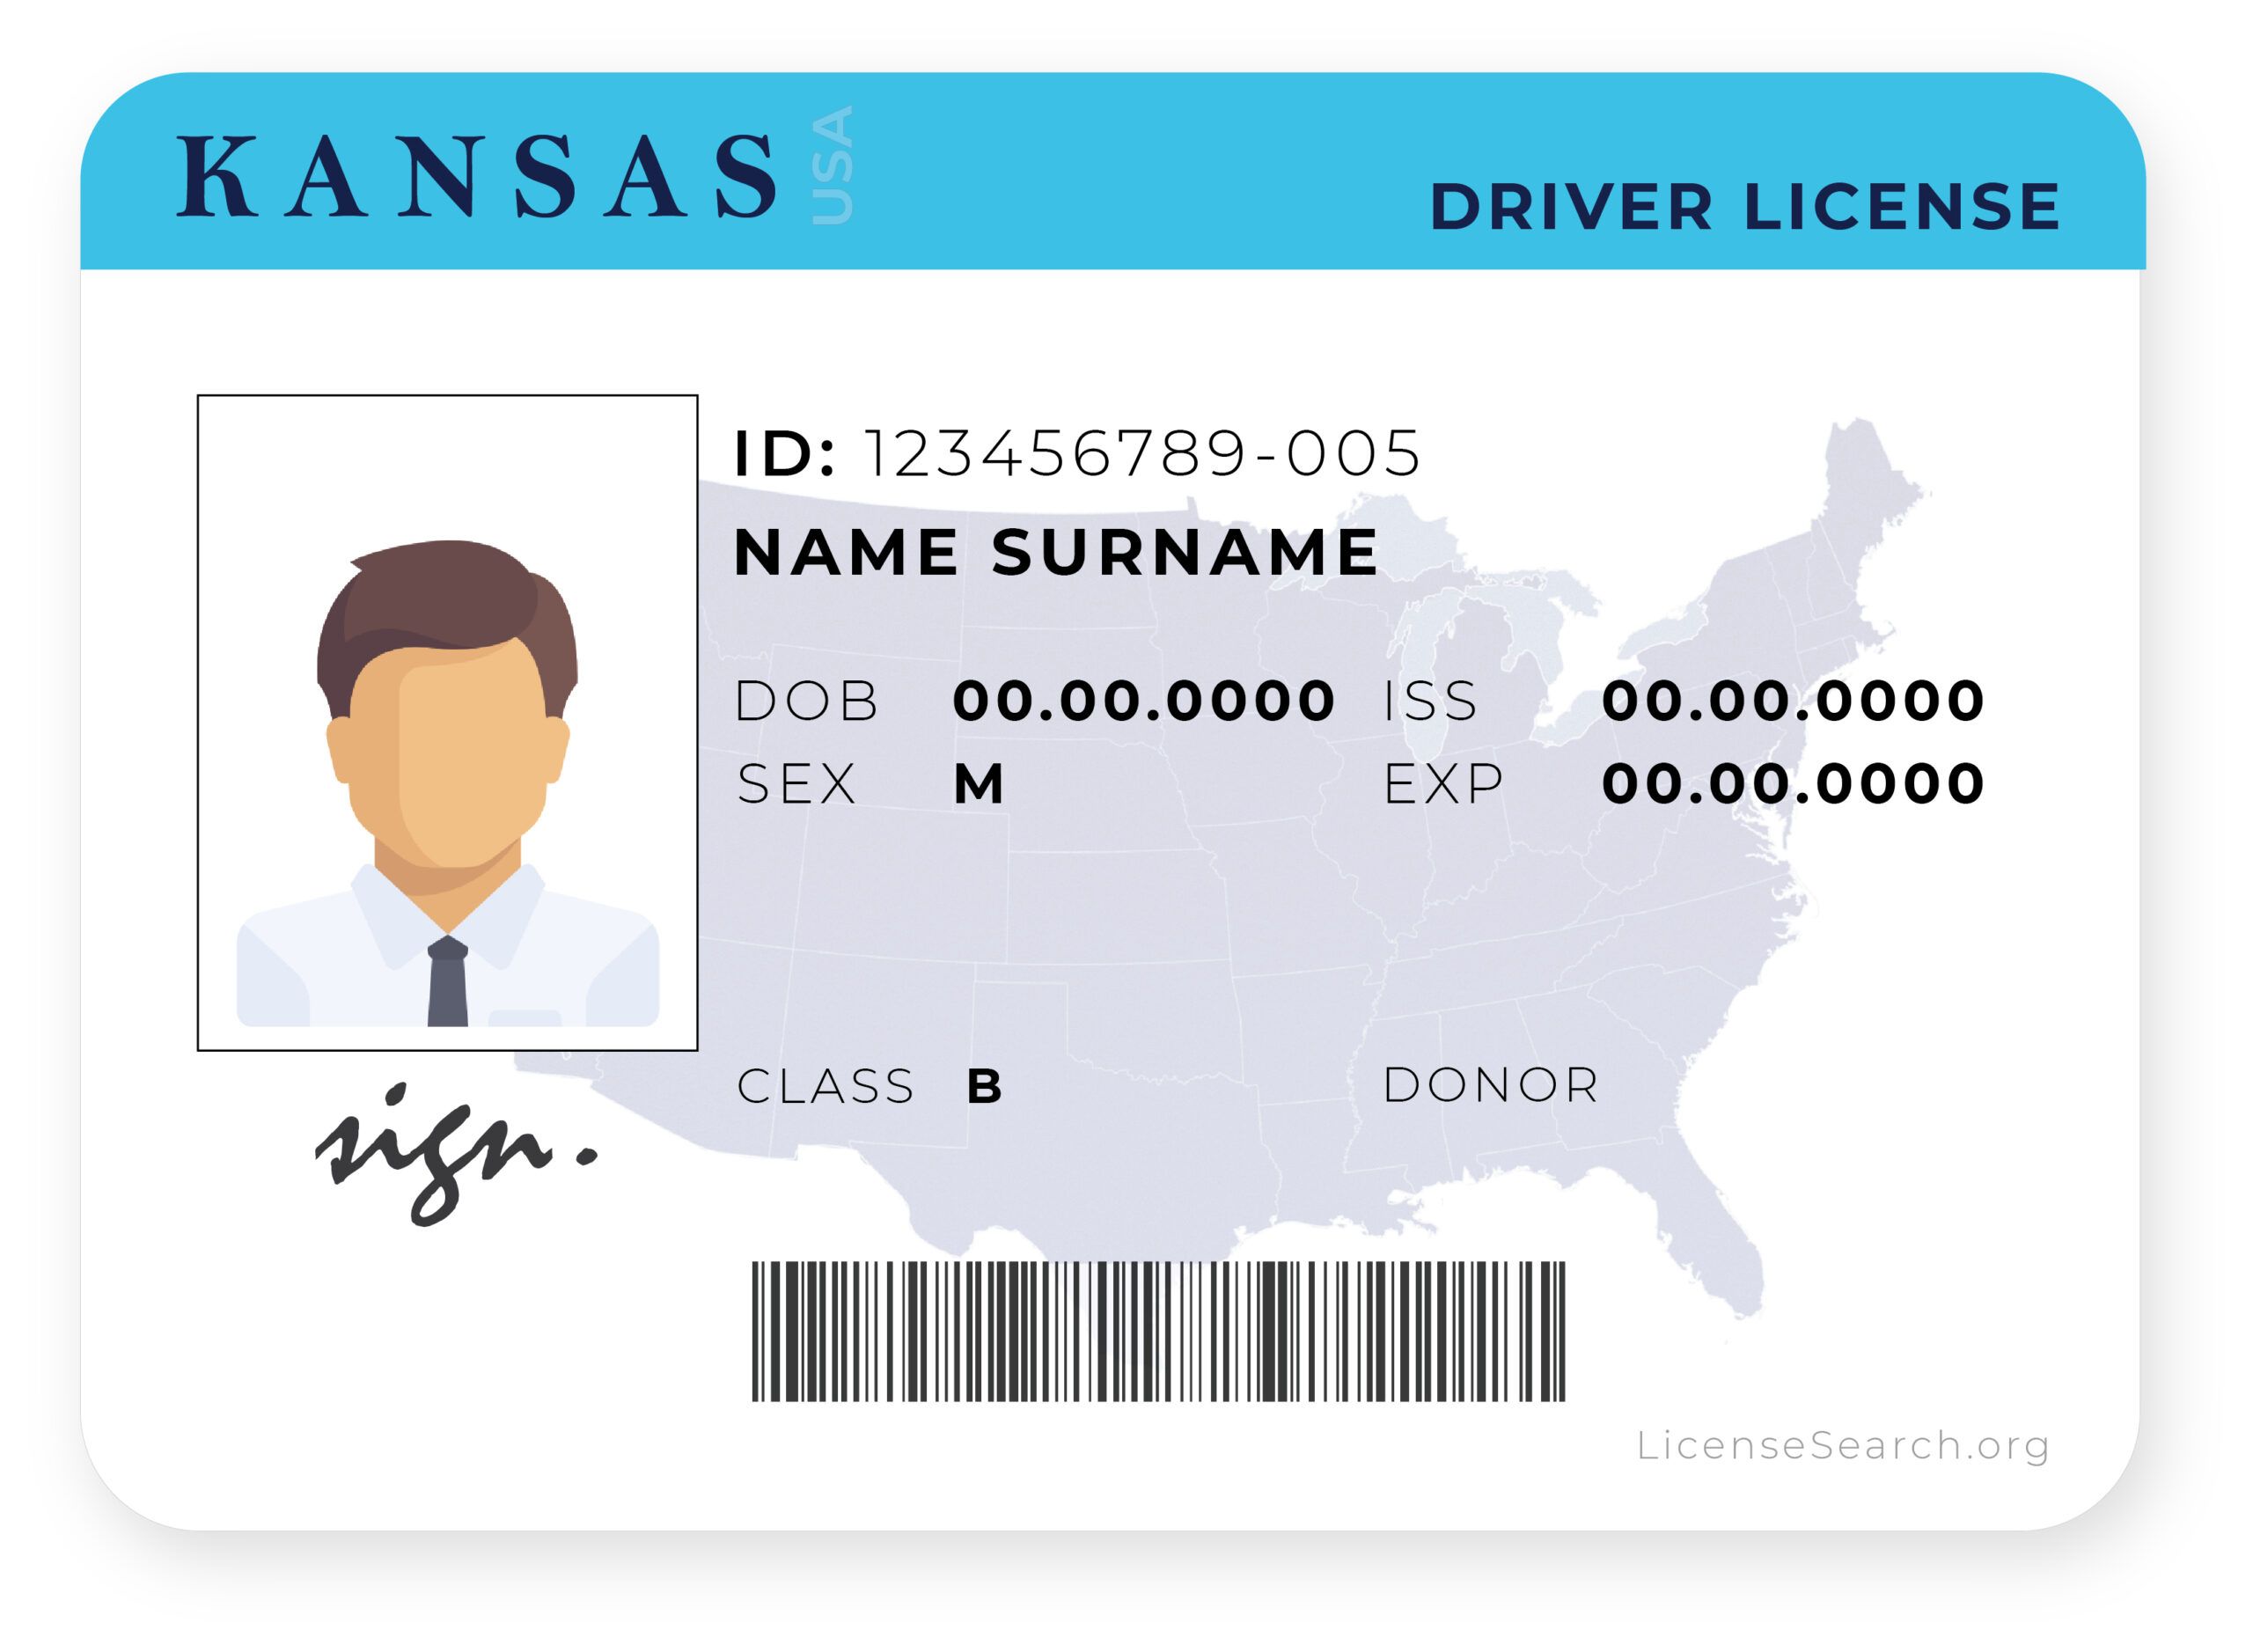 can i renew my driver's license online in kansas